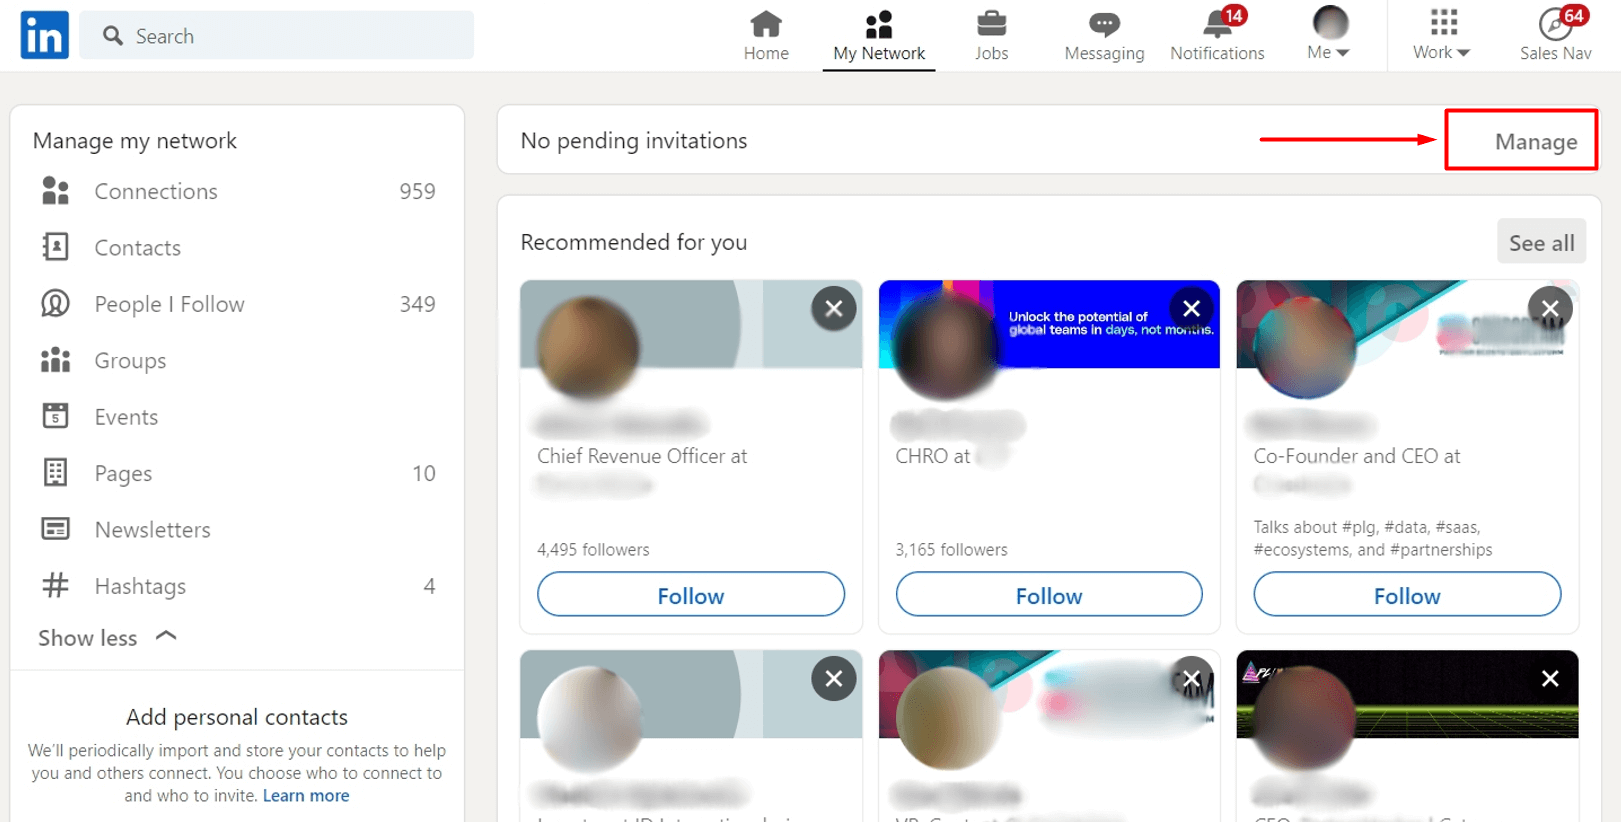 Image of how to cancel LinkedIn invite step 1.2. in case you don't have invites you receive pending